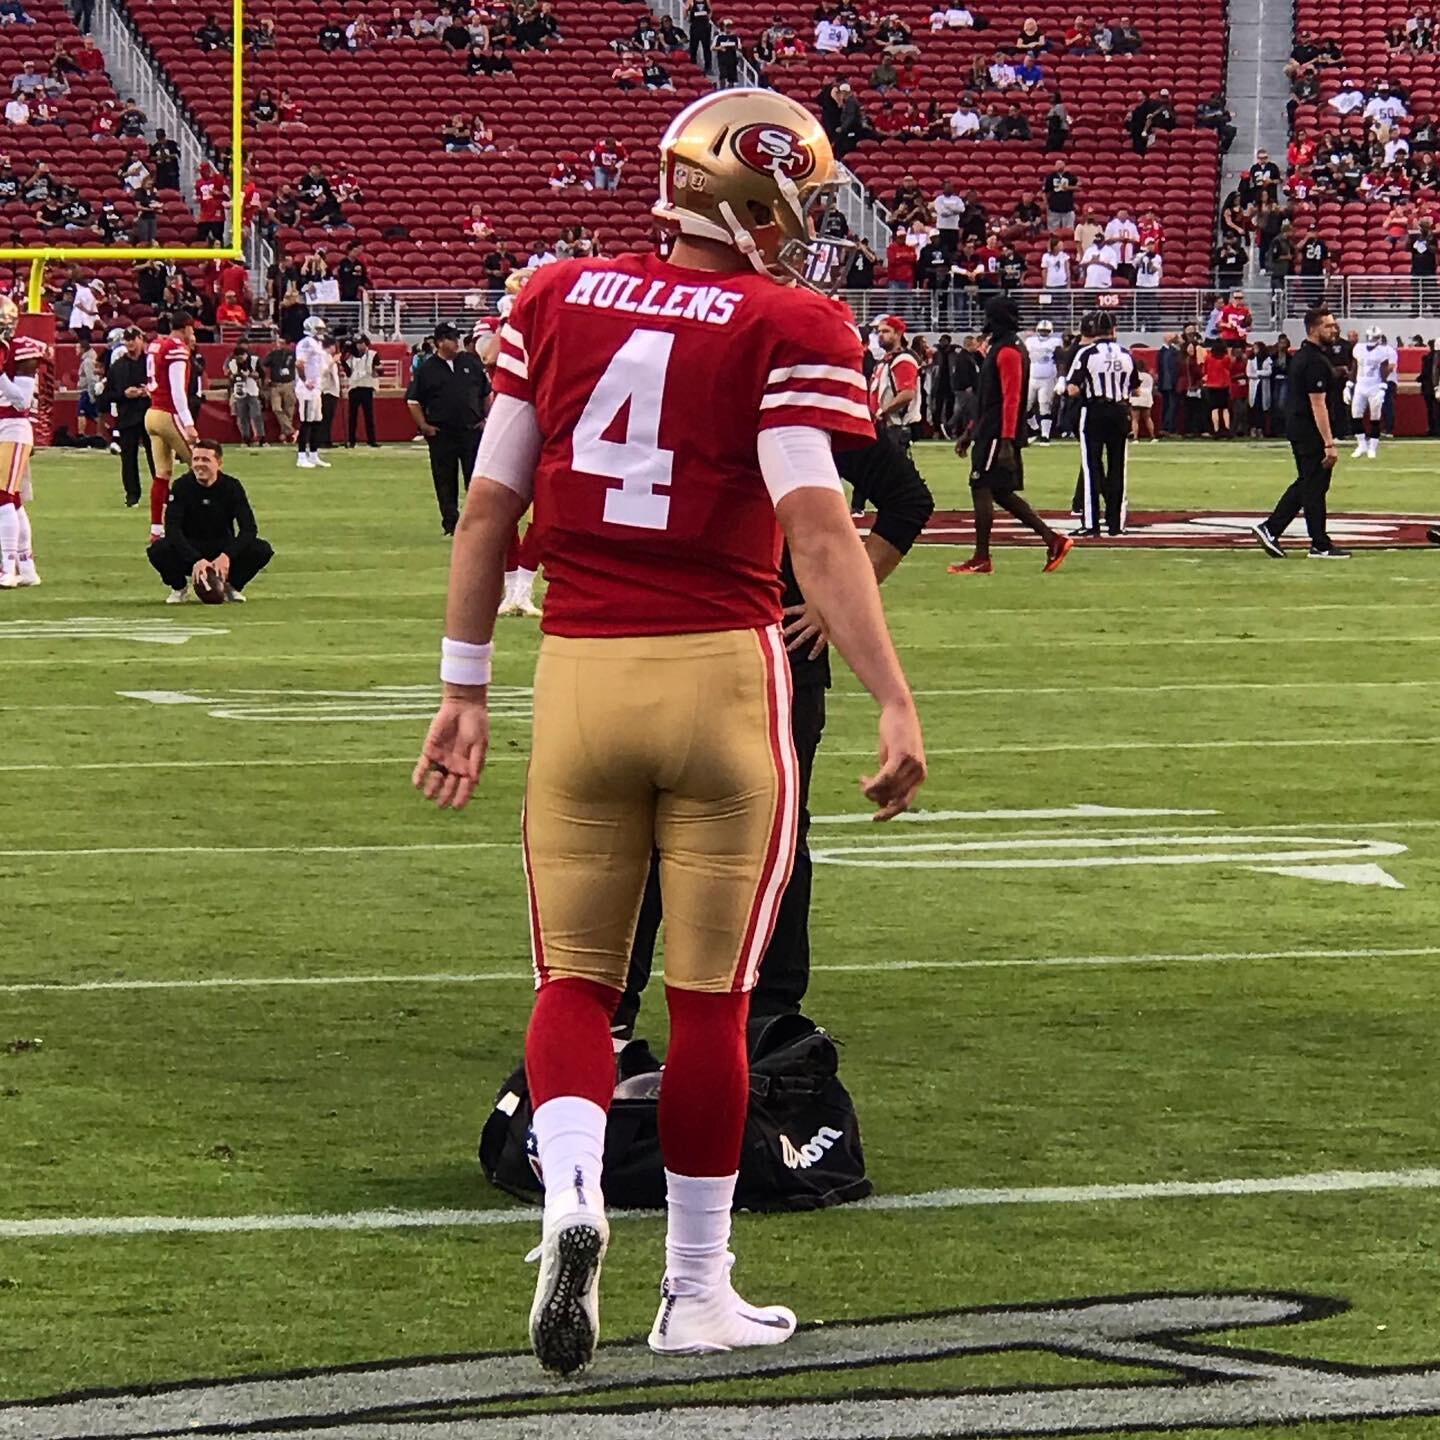 Flashback to the last time Nick Mullens started his first game for the #49ers November 1, 2018 vs the Raiders. He will have his ninth start for the club Sunday facing the #NYGiants #SFvsNYG
.
Remember George Kittle's single-season receiving record fo